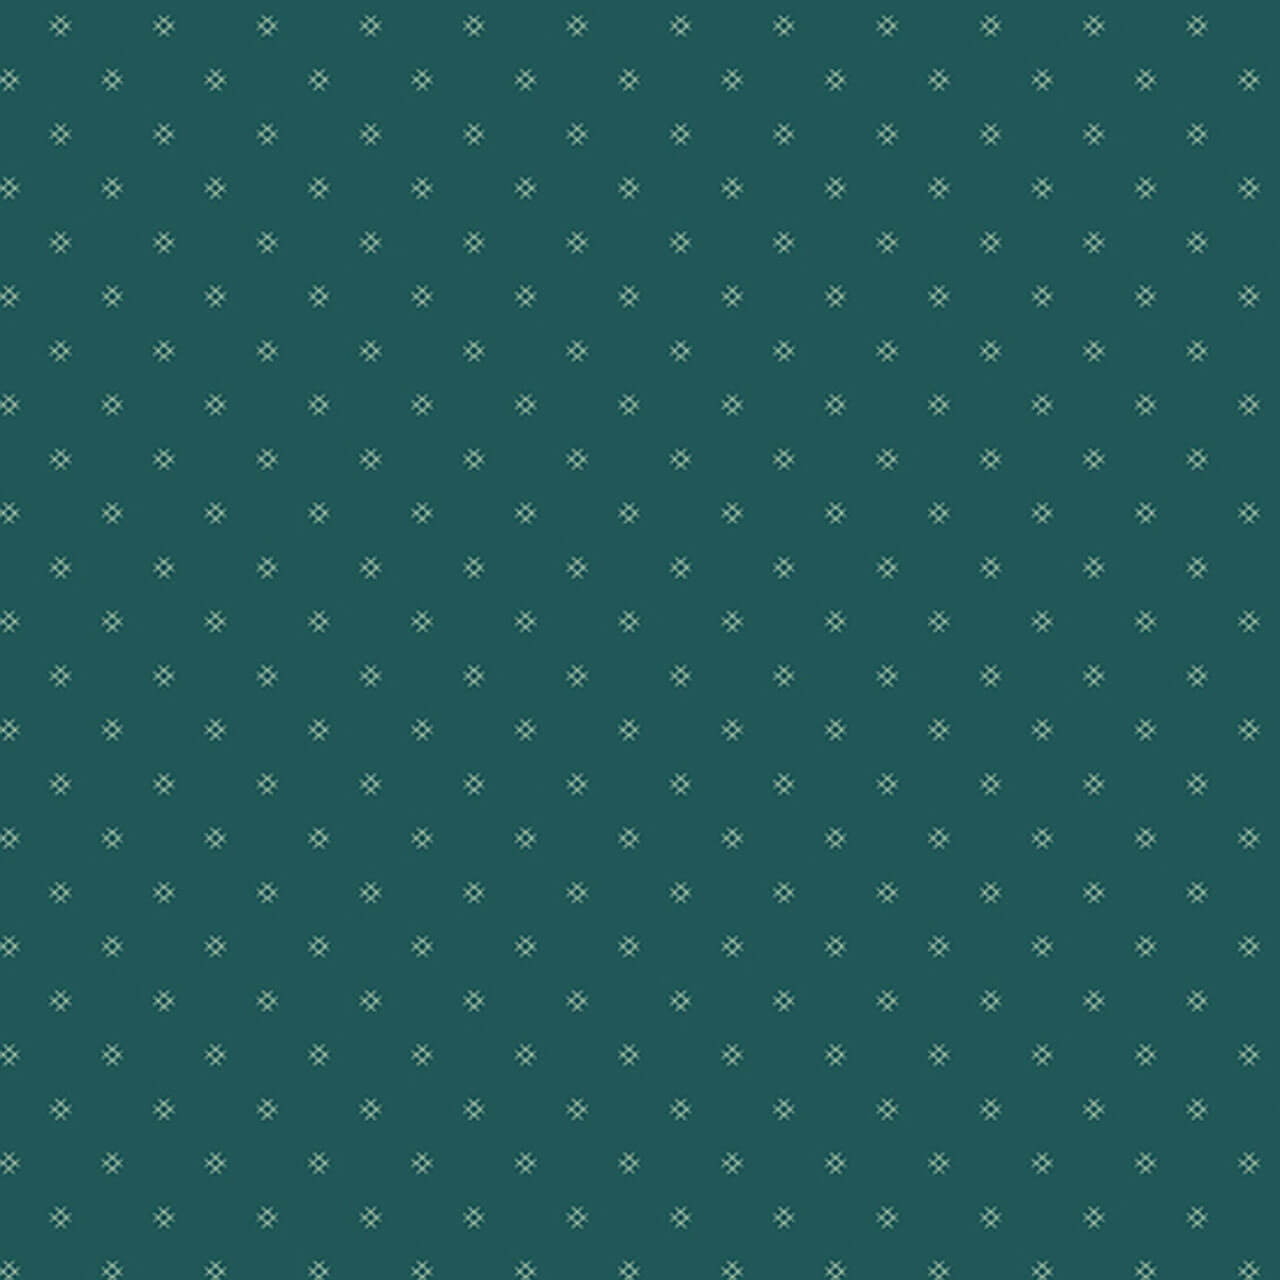 100% cotton 'Tic Tac Toe in Teal' fabric from Andover Fabrics' Jewel Box collection, showcasing a white cross pattern on a teal background.